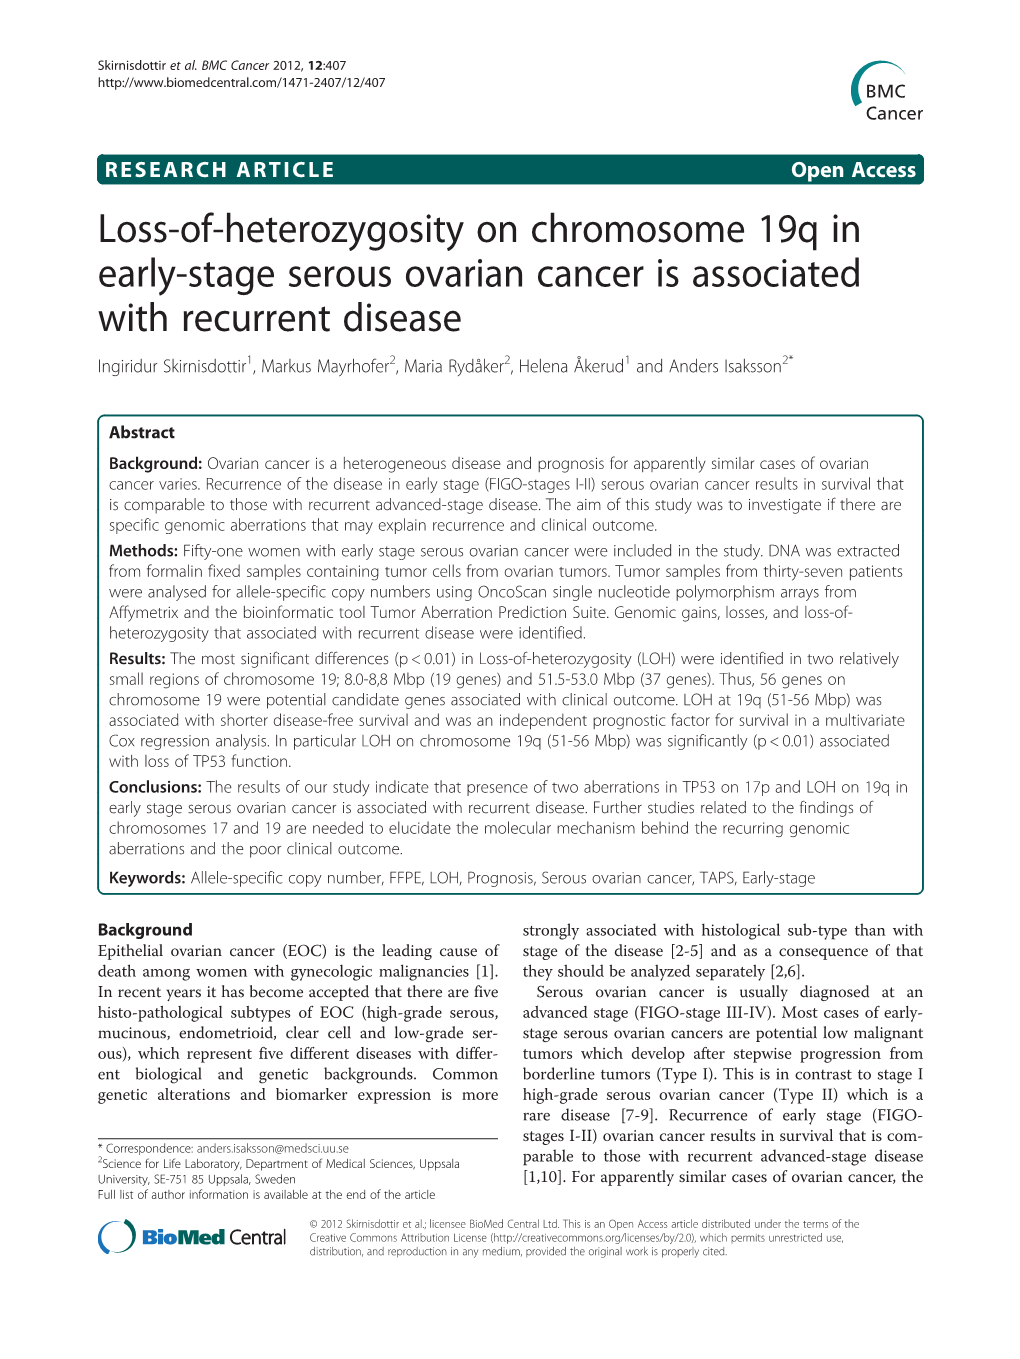 Loss-Of-Heterozygosity on Chromosome 19Q in Early-Stage Serous Ovarian Cancer Is Associated with Recurrent Disease